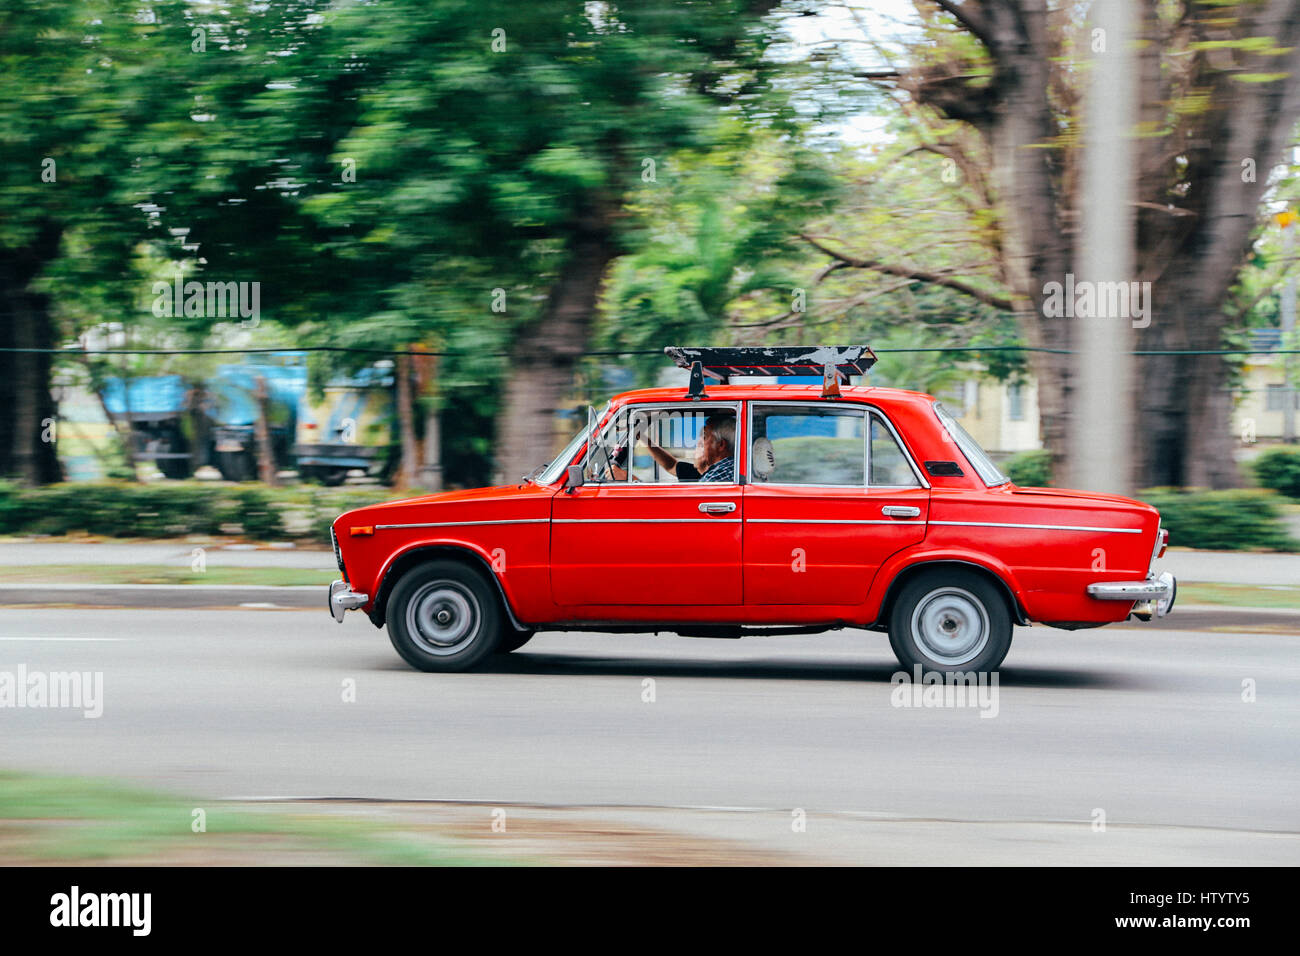 An old red Lada car in motion on a road in Havana, Cuba Stock Photo